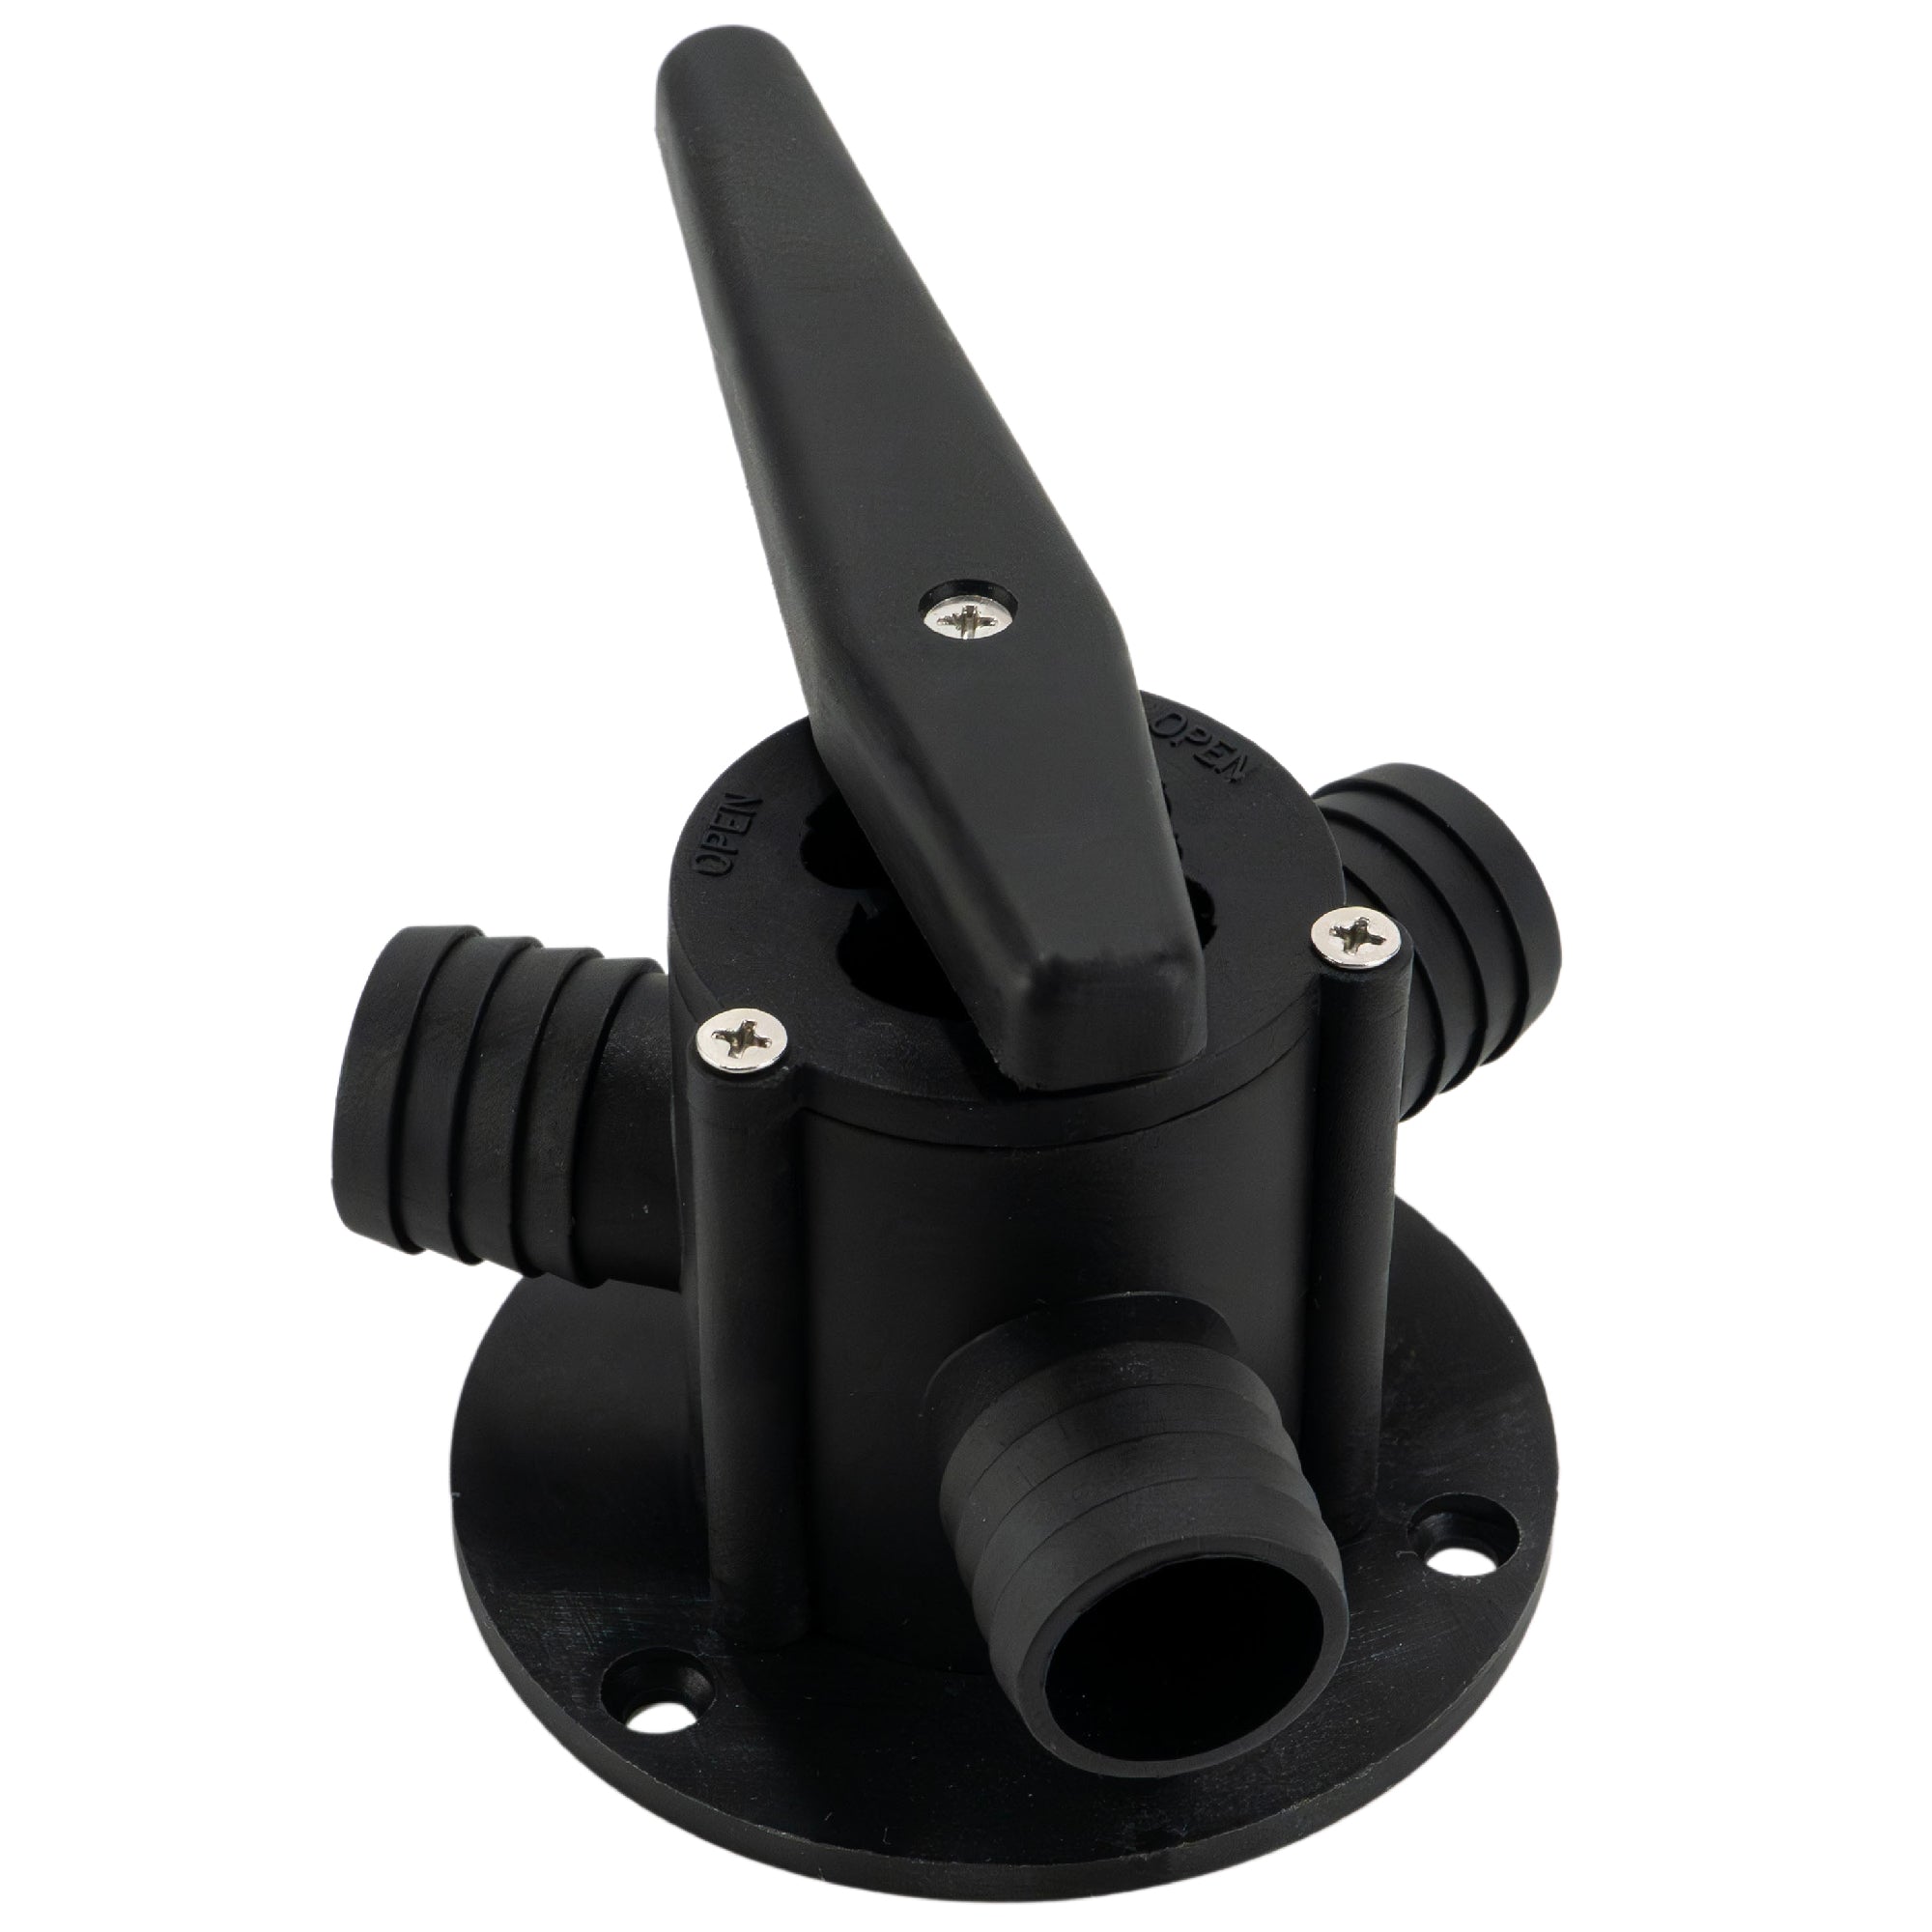 Base Mount Y-Valve with 1-Inch Barbed Hose Ports - FO4124